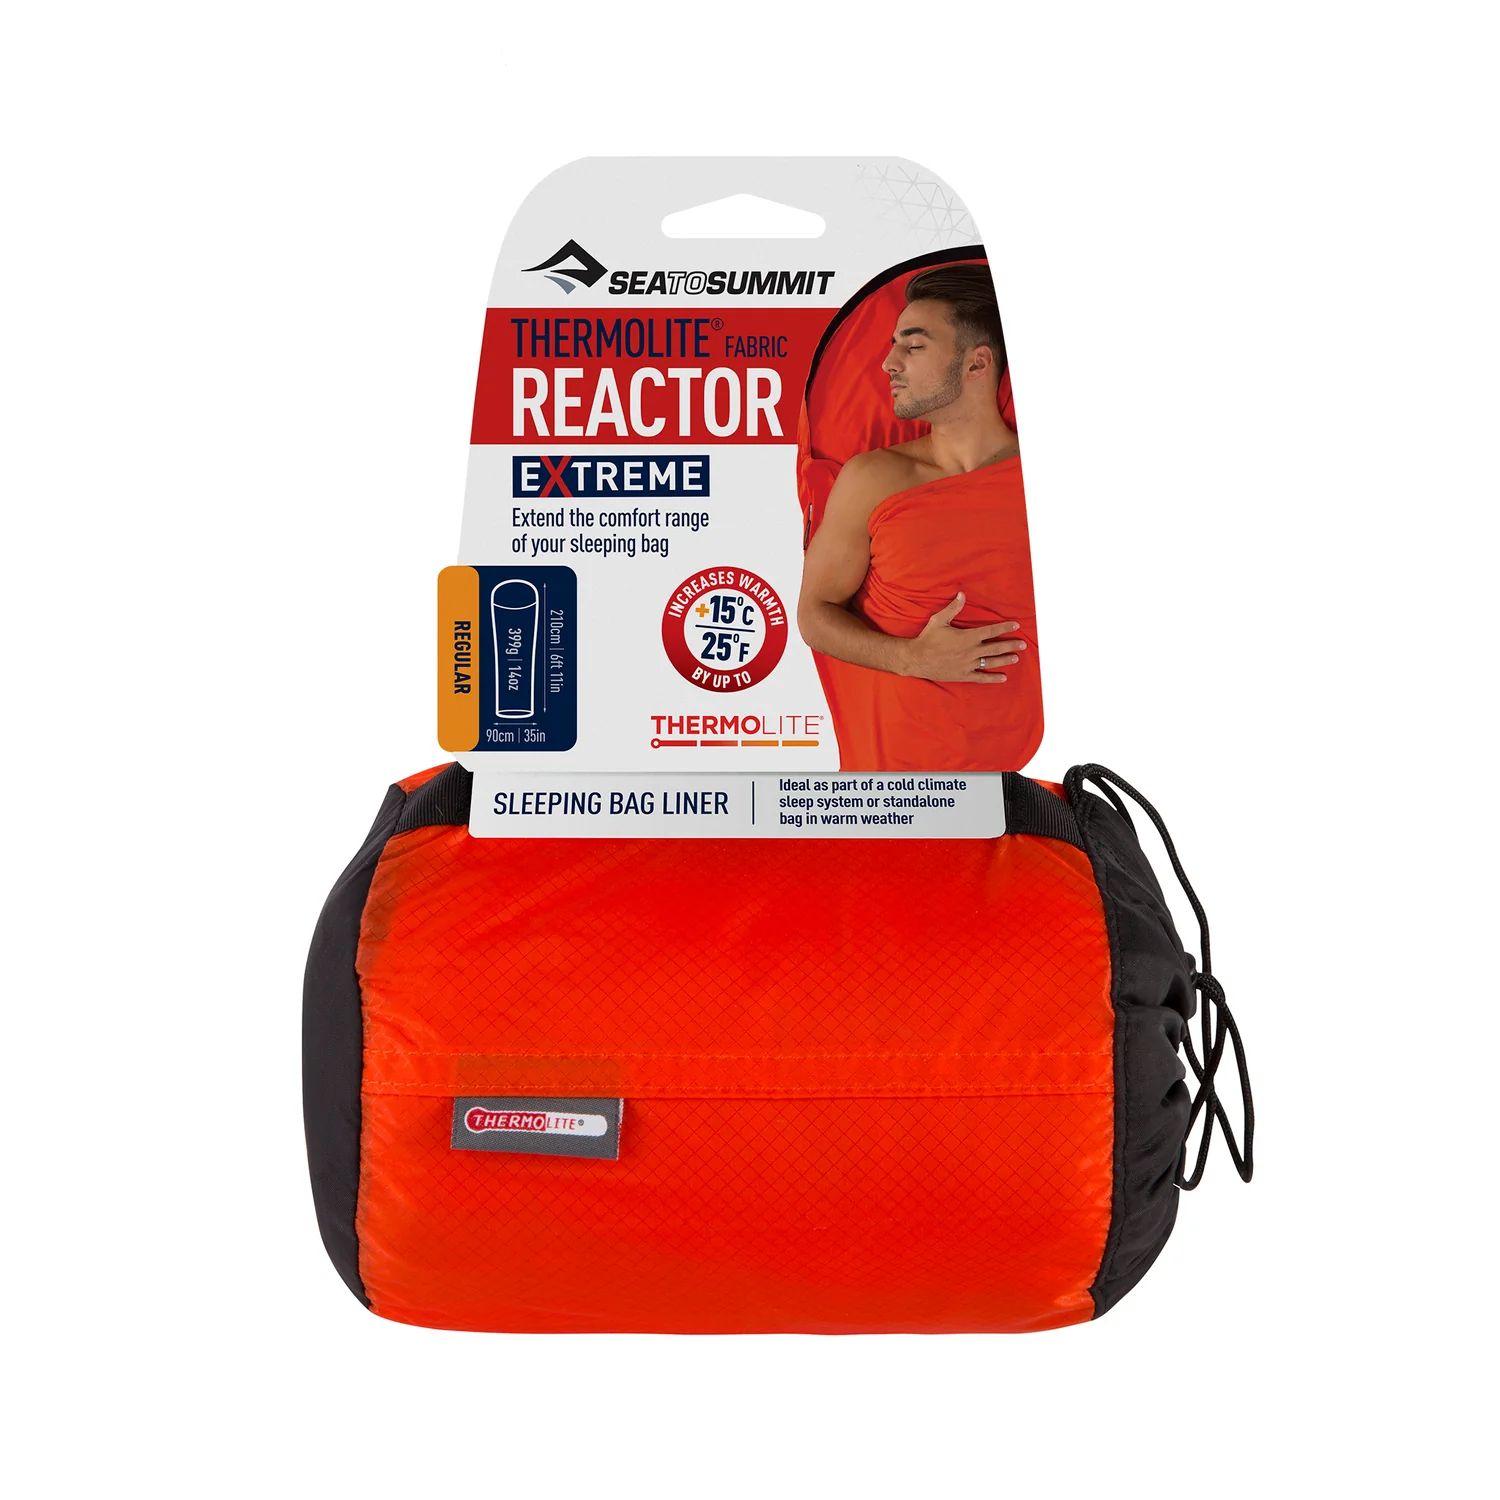 SEA TO SUMMIT THERMOLITE REACTOR EXTREME liner sintético 15°C Red